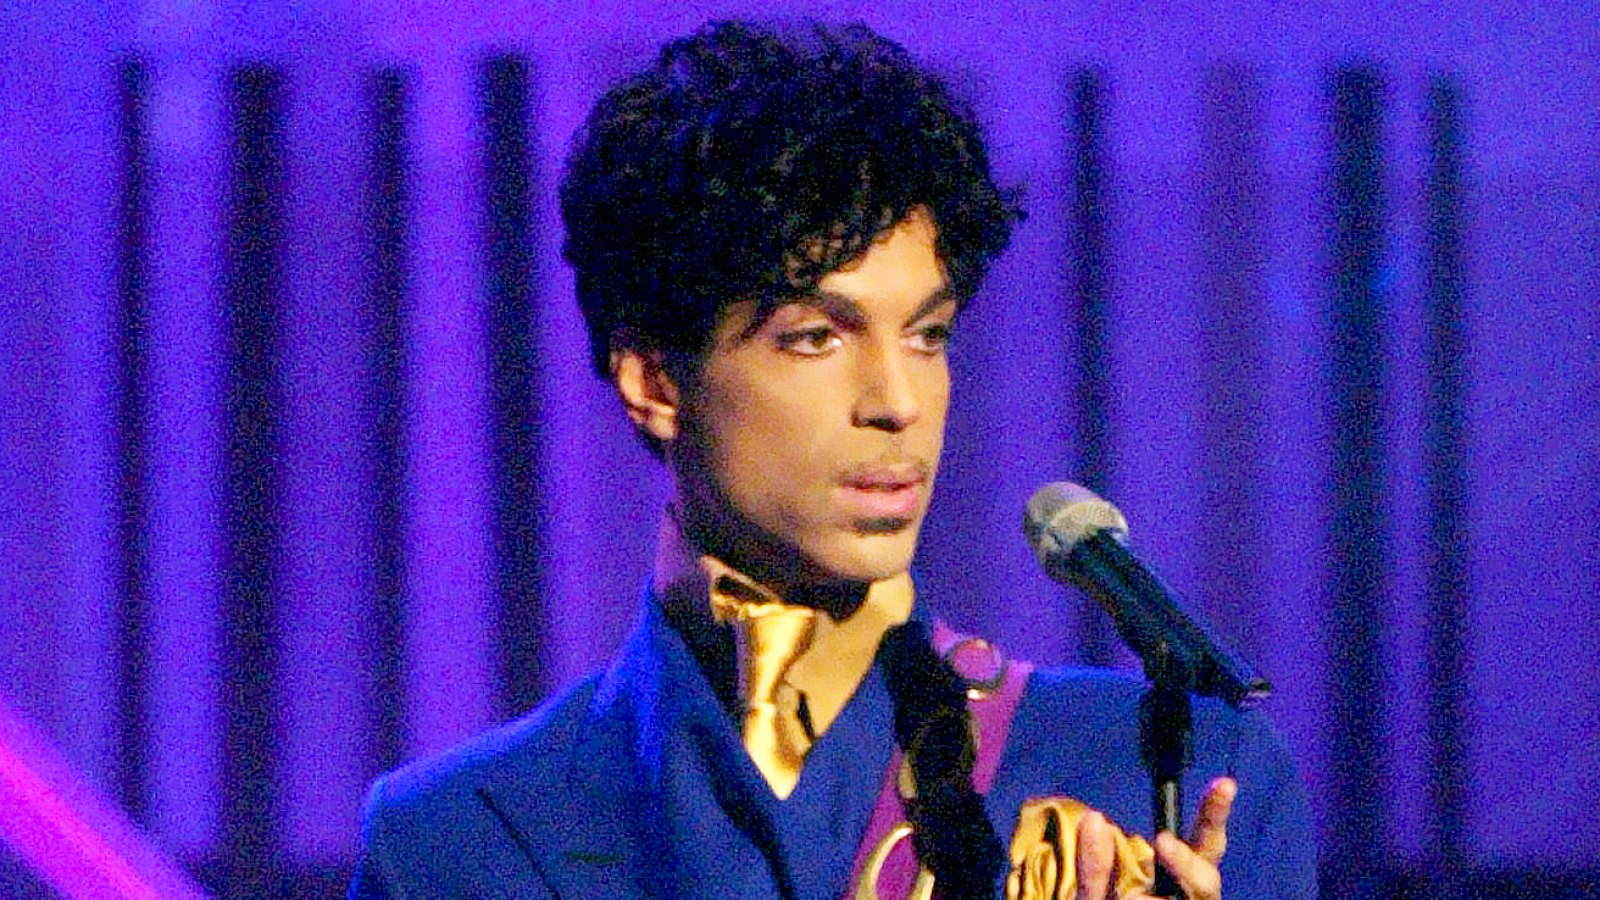 Prince performs the song "Purple Rain" at the 46th Annual Grammy Awards.